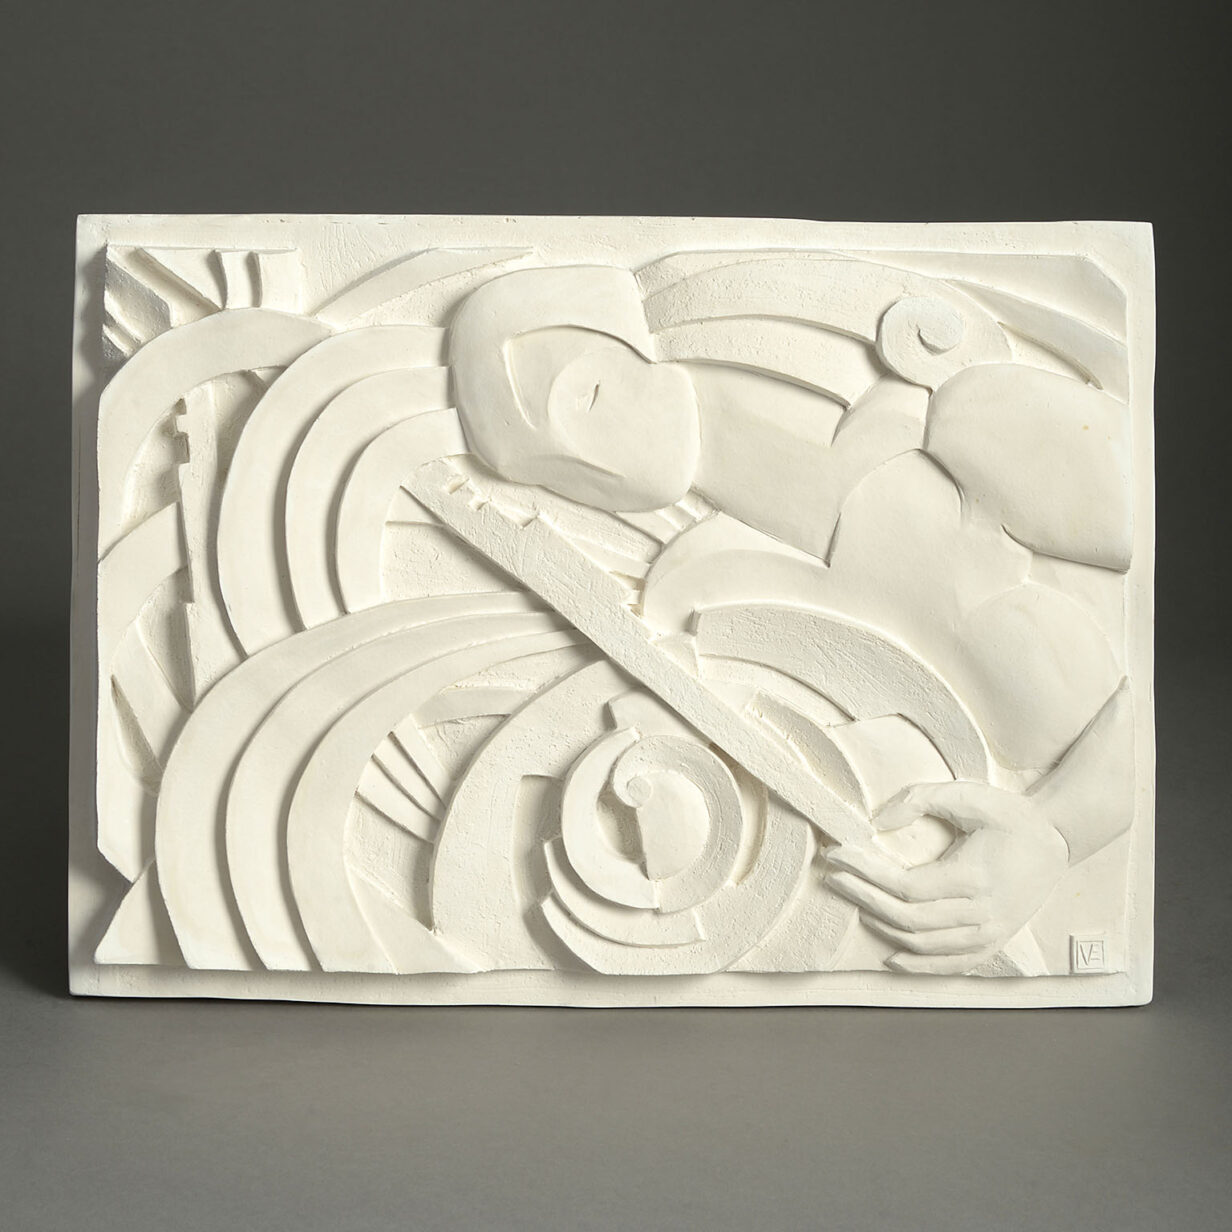 Simon orrell - four plaster plaques depicting the muses